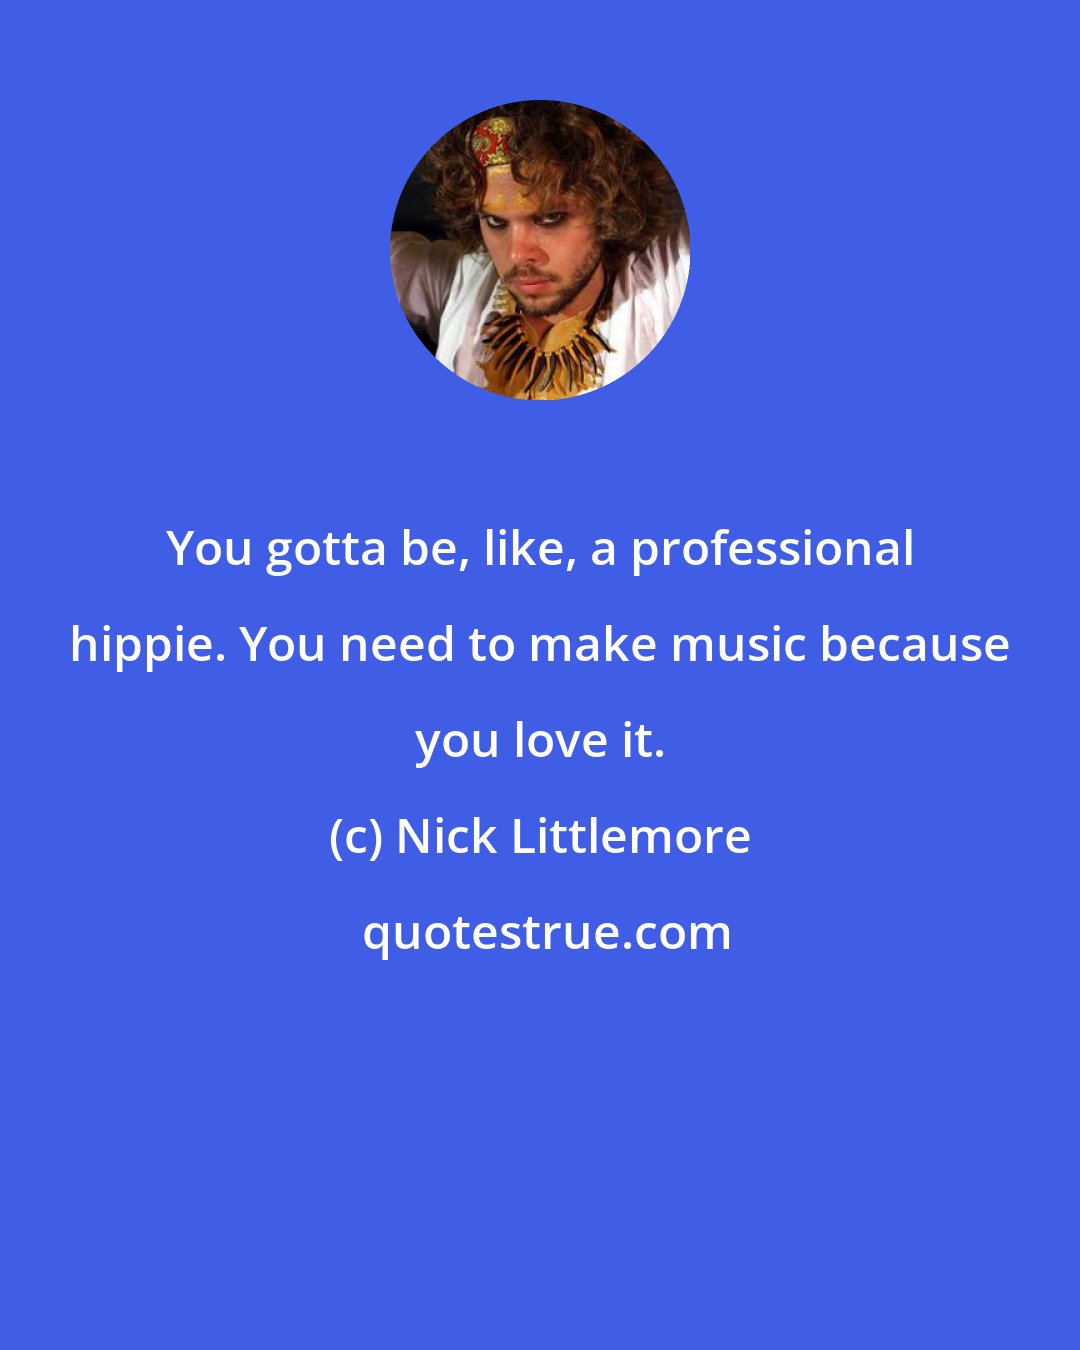 Nick Littlemore: You gotta be, like, a professional hippie. You need to make music because you love it.